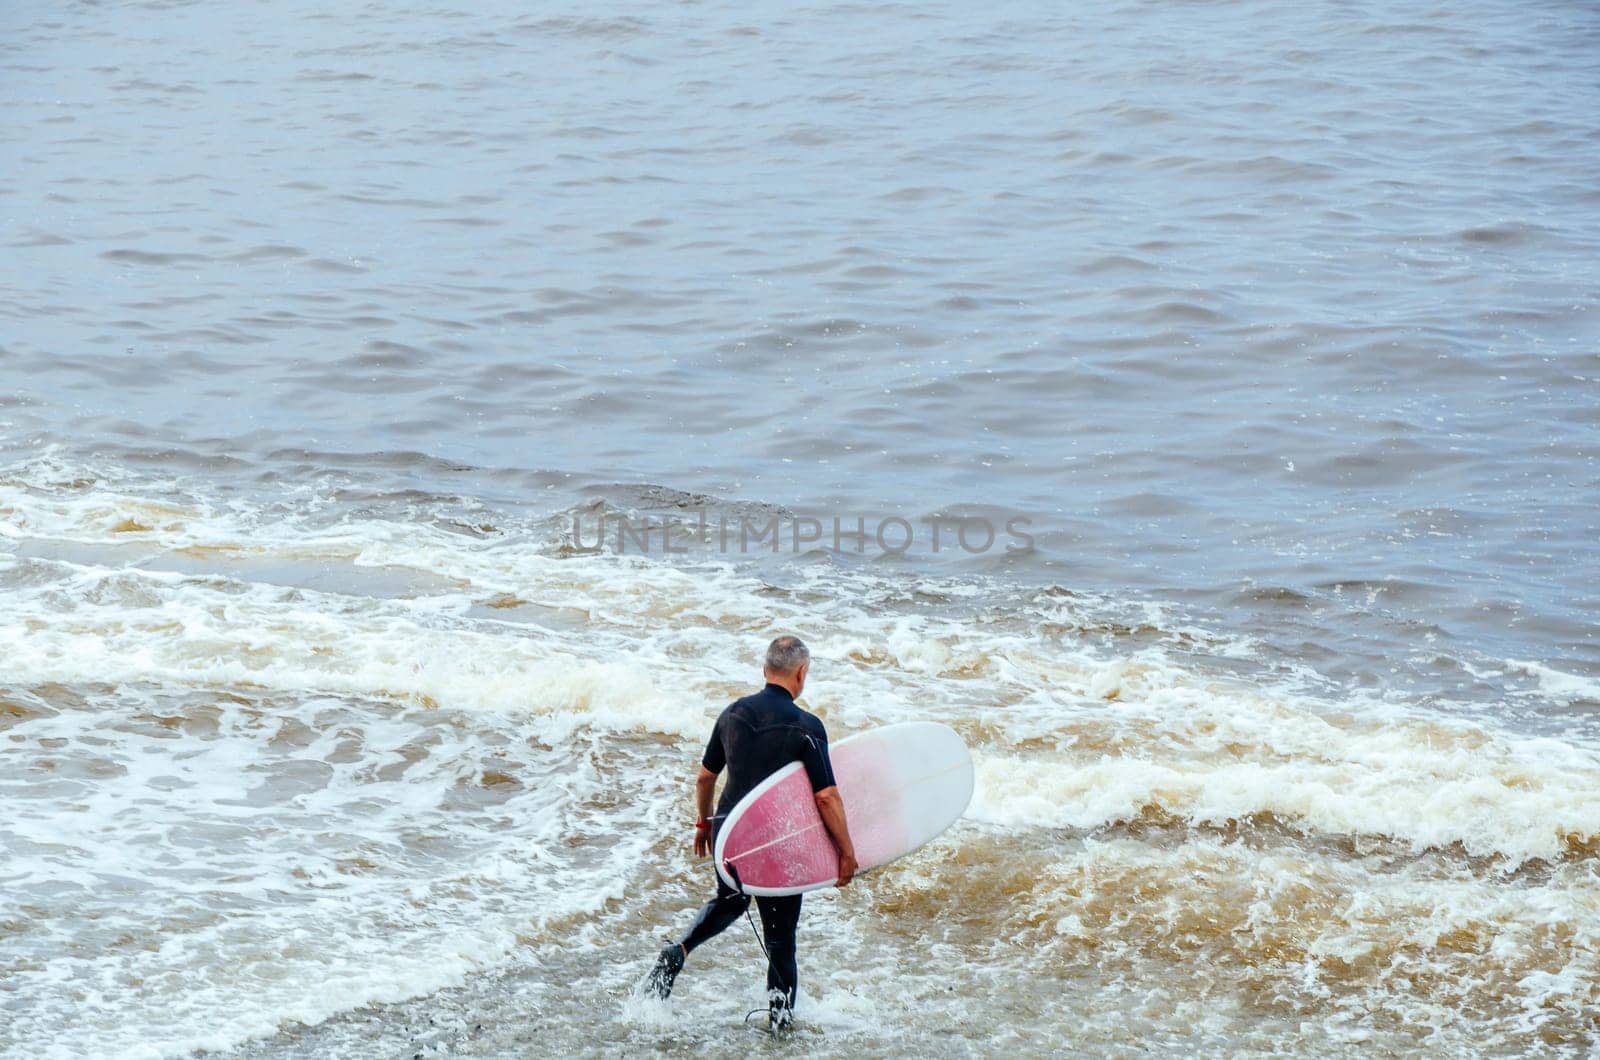 Surfer. Surfer man with surfboard walking into the sea. Healthy lifestyle, water activities, water sports